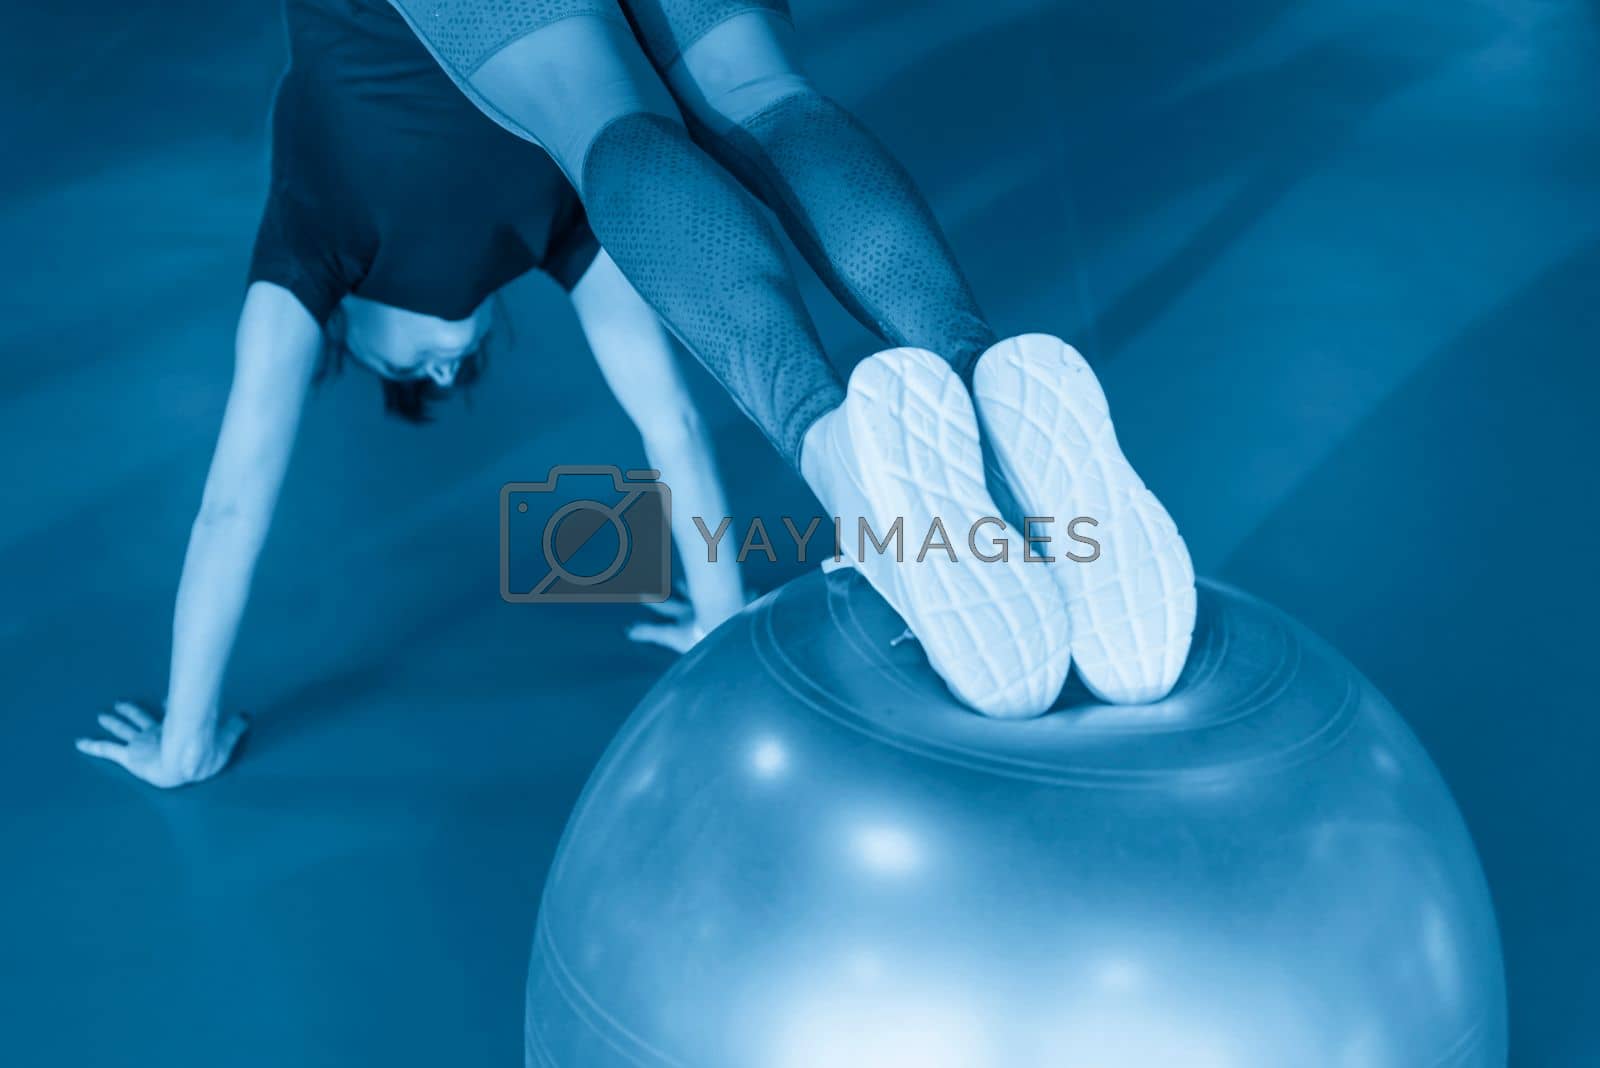 Royalty free image of Woman at the gym doing exercises with her legs on pilates ball by Mariakray